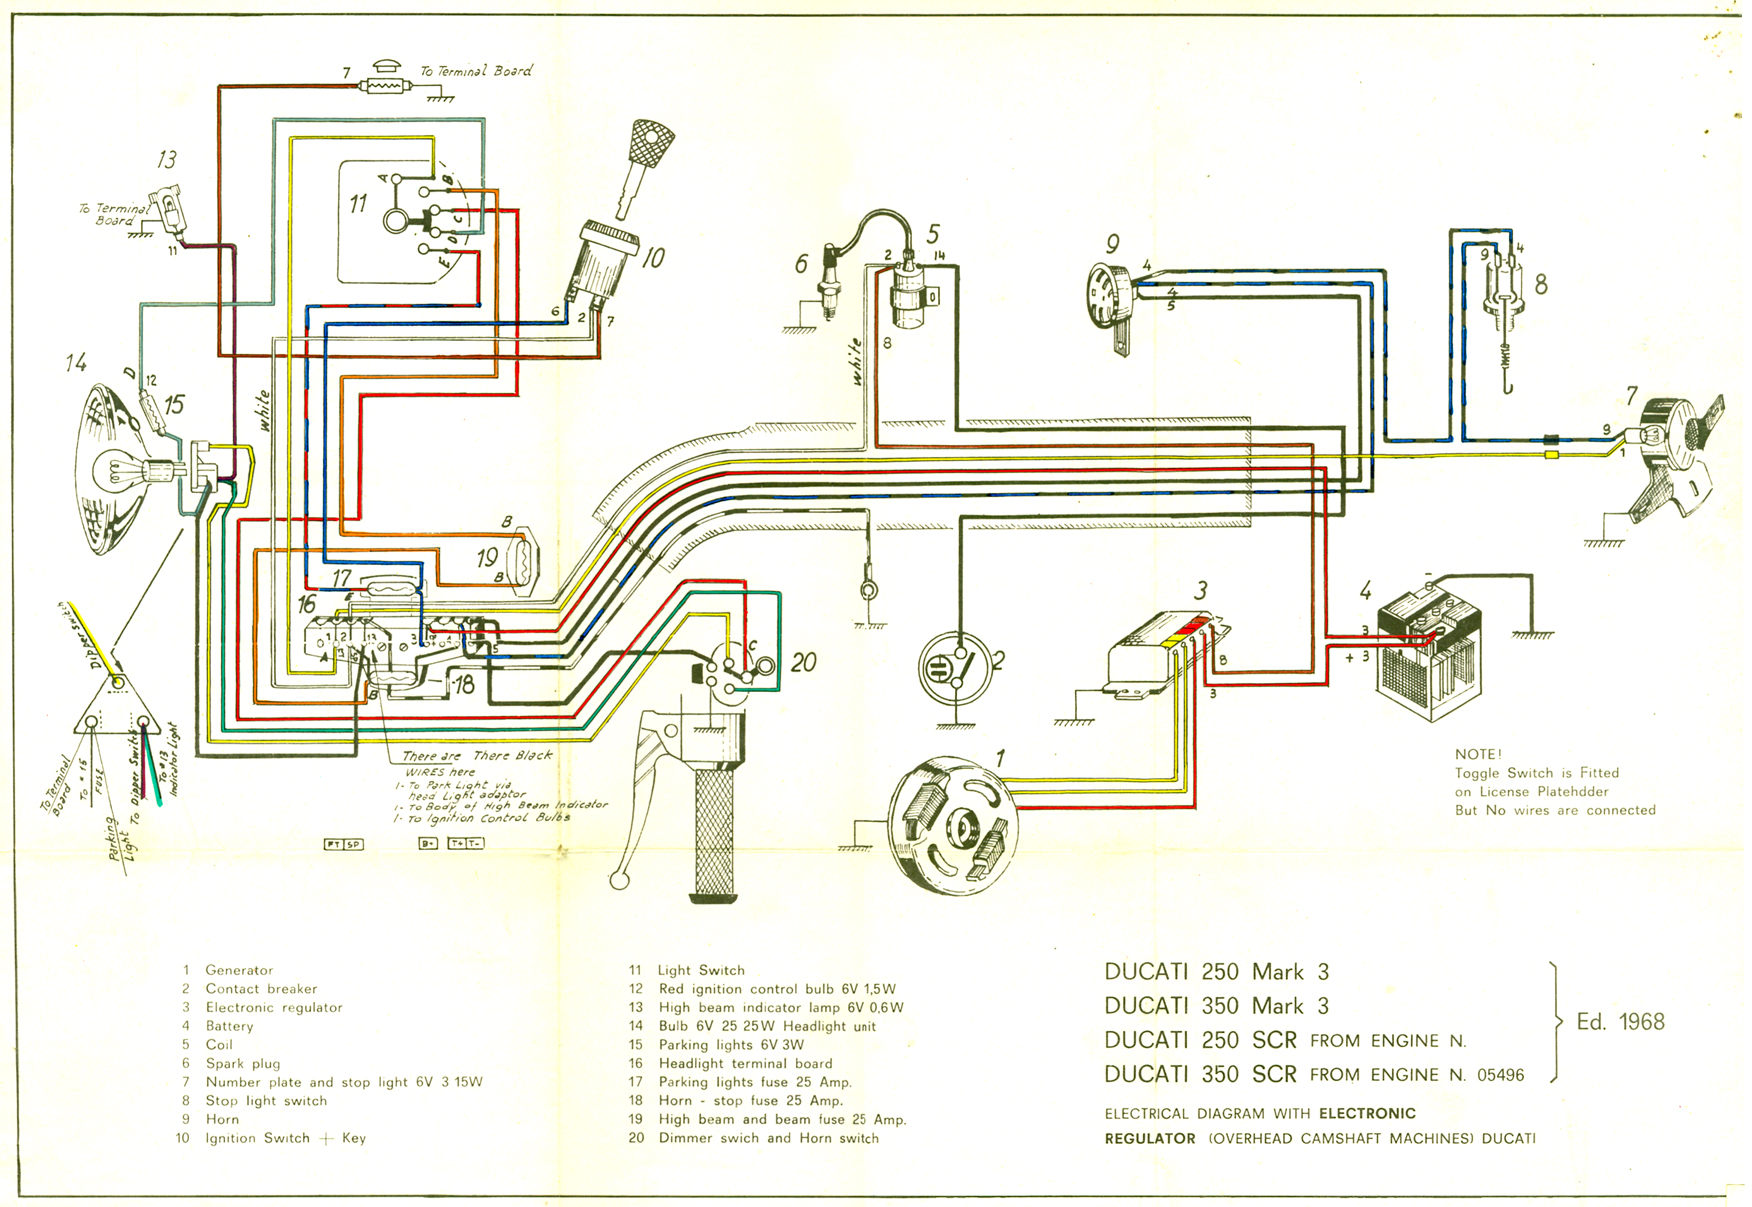 Xrm 110 Electrical Wiring Diagram On Images Free Download